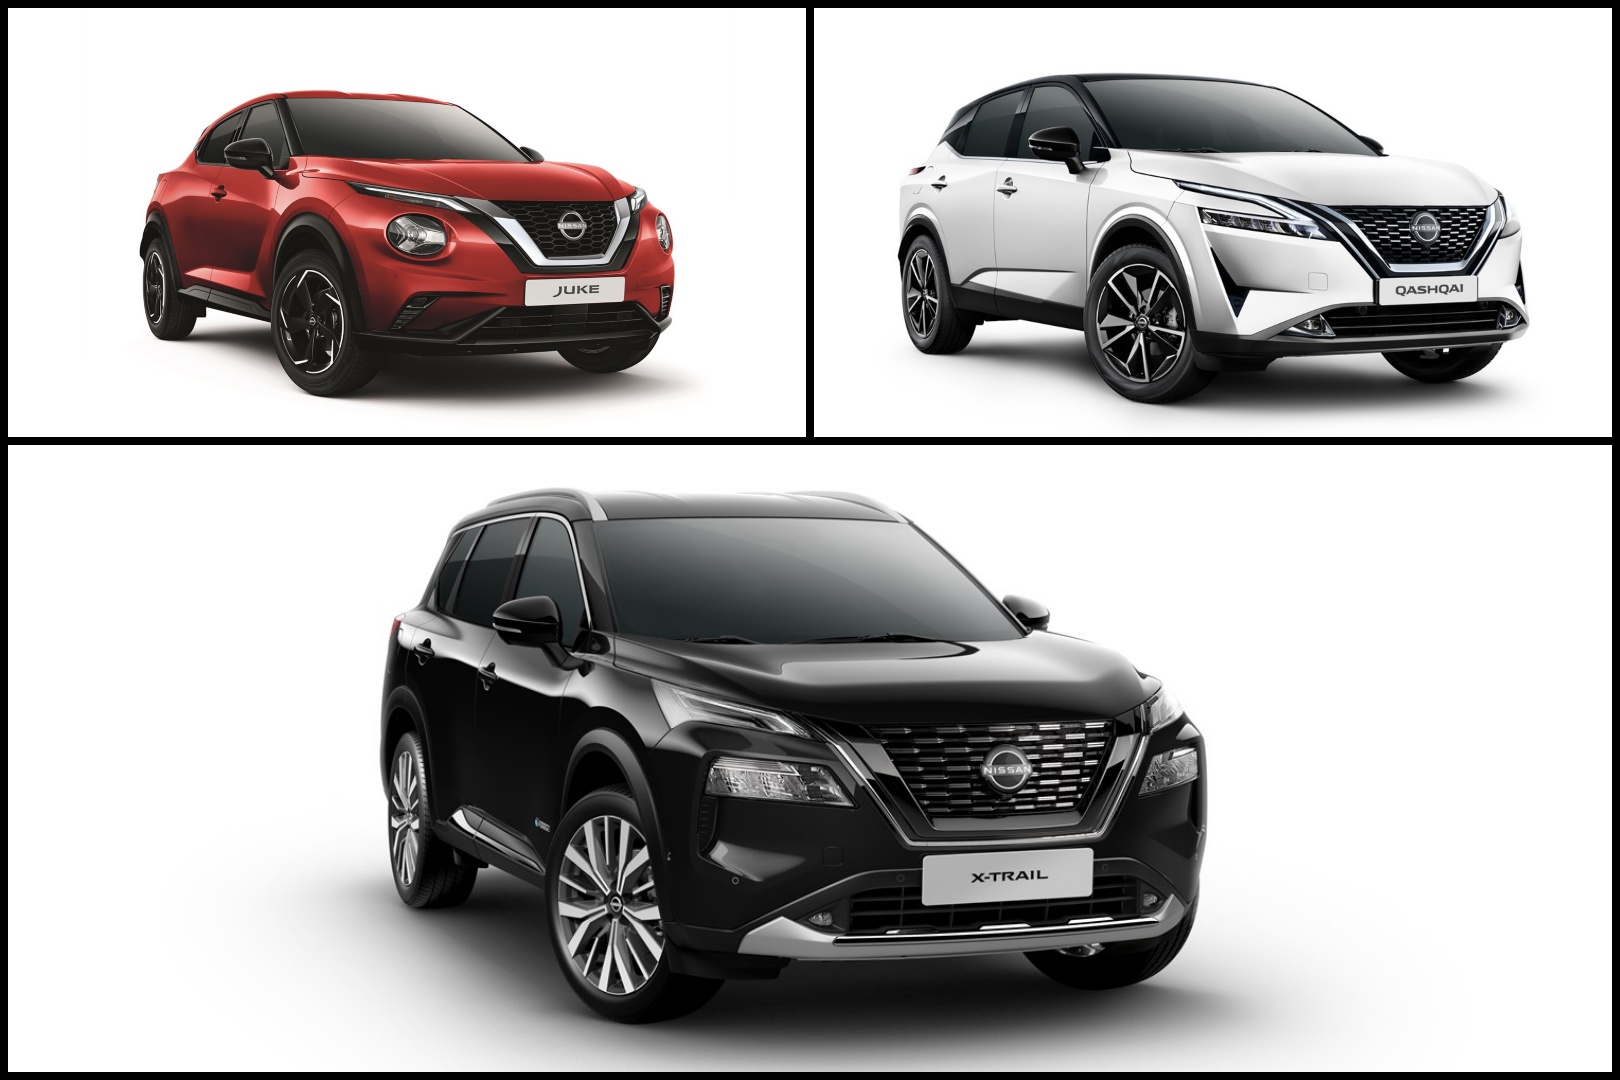 http://13.234.82.140/wp-content/uploads/2022/10/Nissan-unveils-the-Qashqai-Juke-and-X-Trail-in-India.jpg